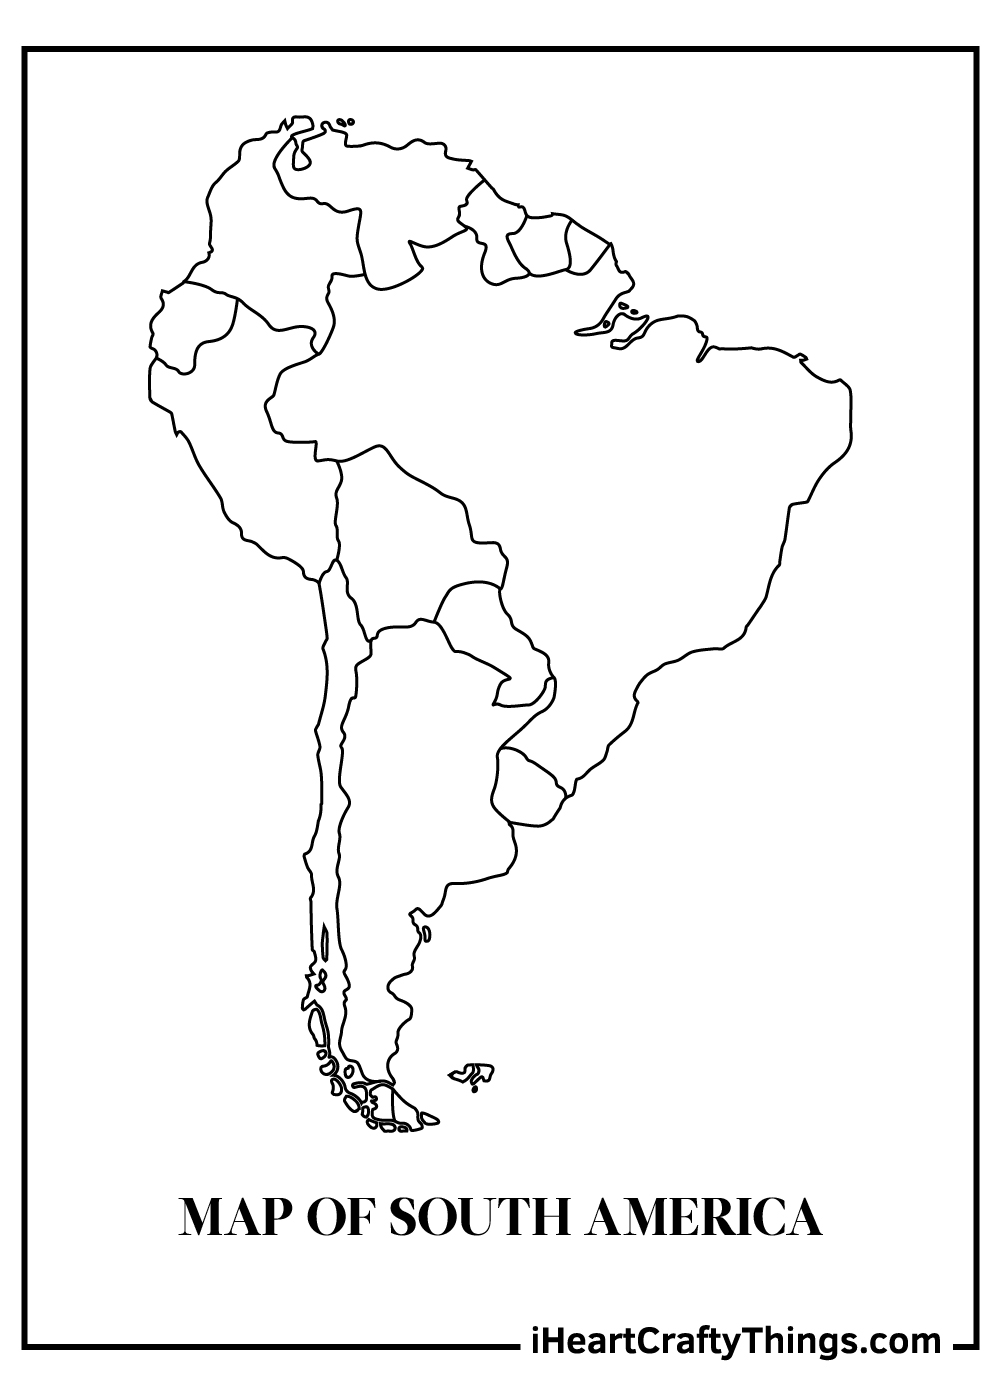 World map coloring pages free printables